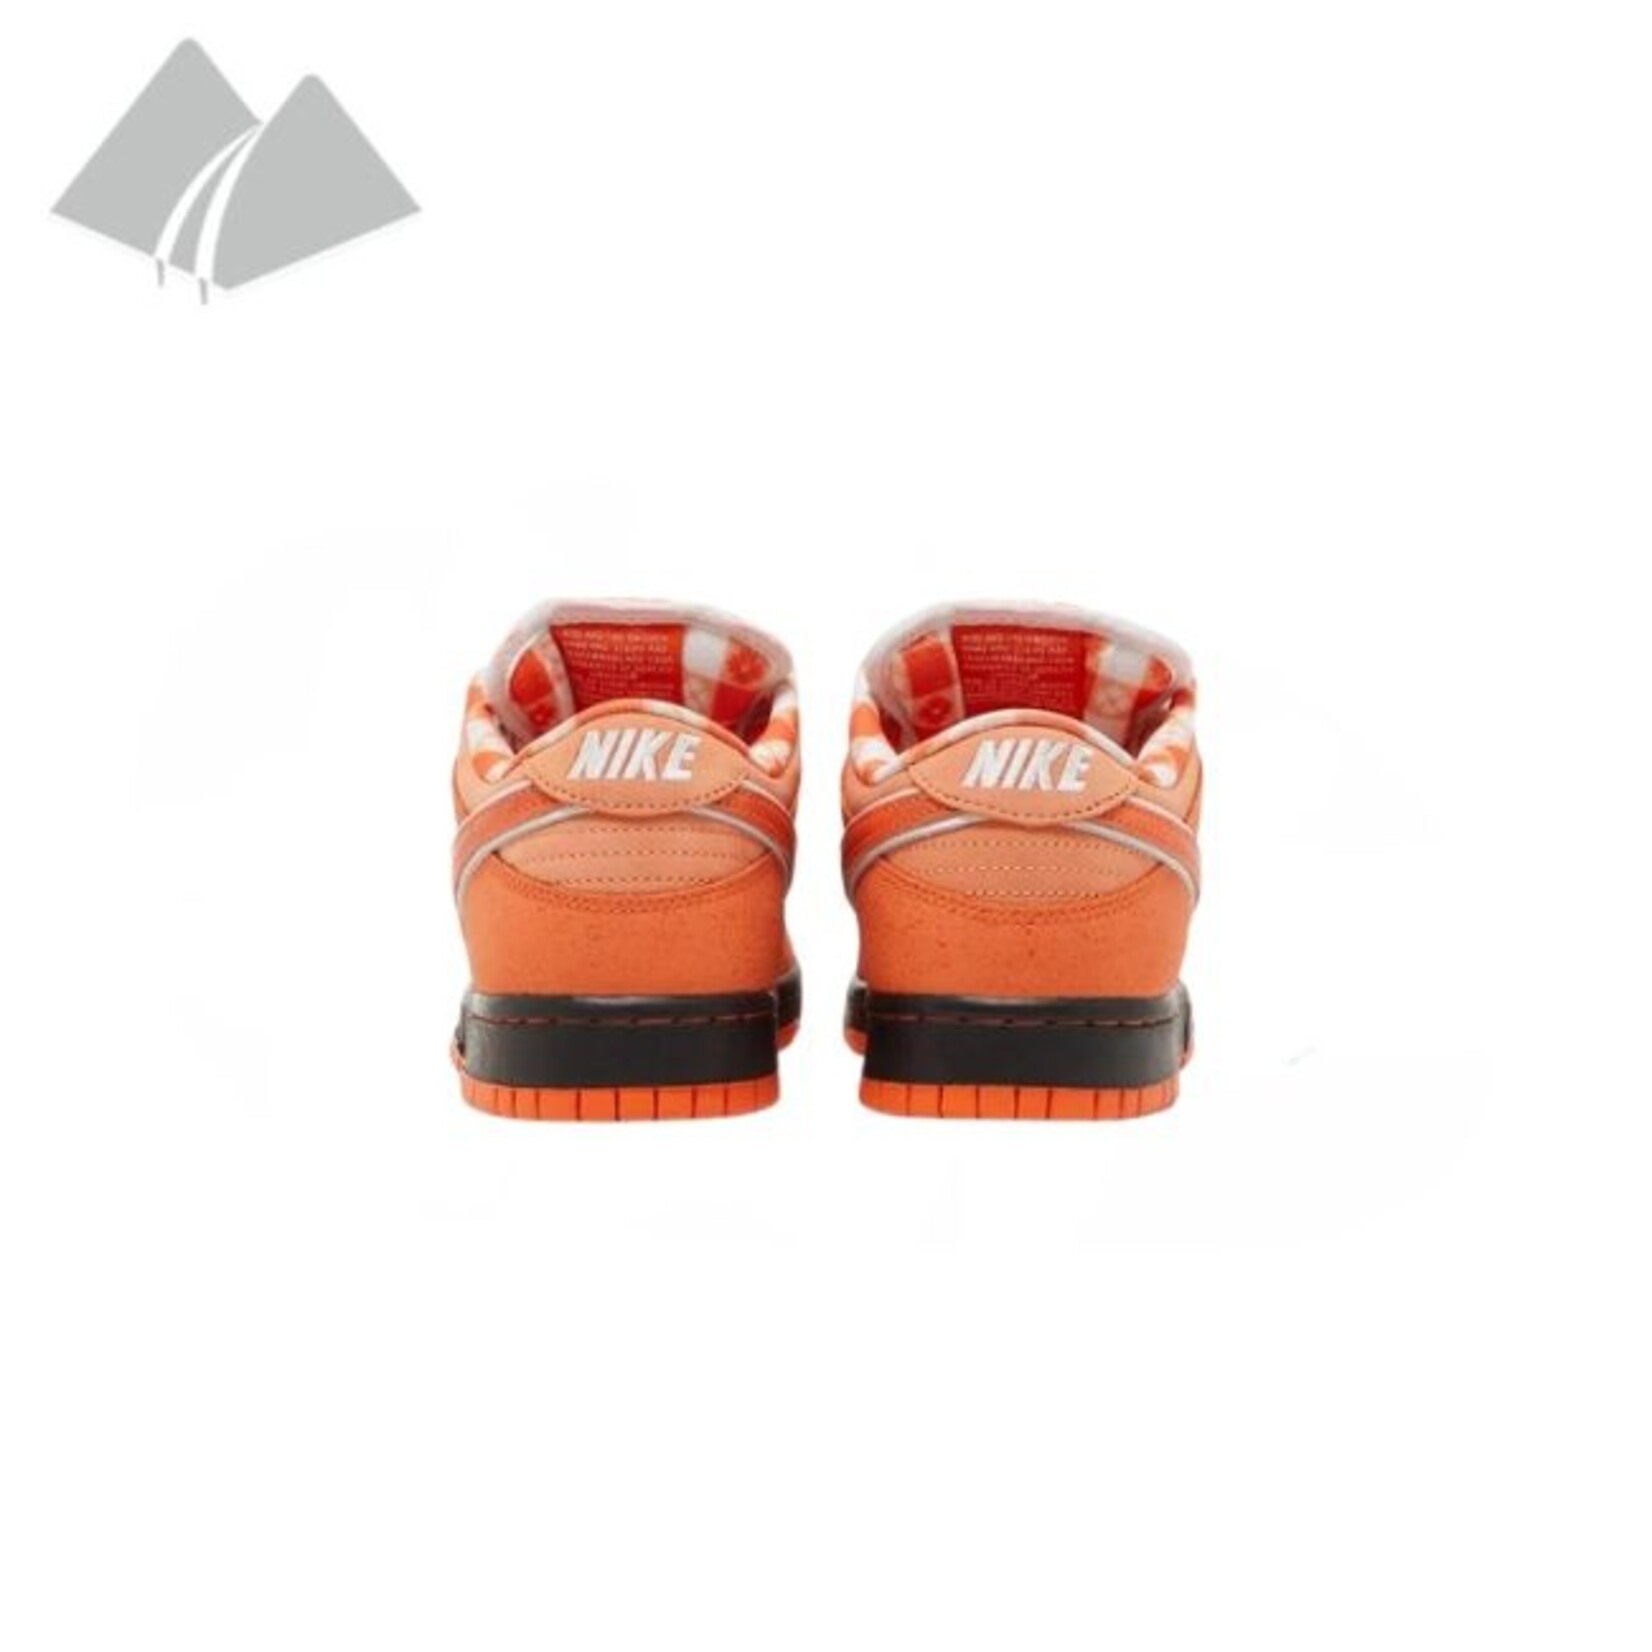 Nike Nike SB Dunk Low (M) Concepts Orange Lobster (Special Box)